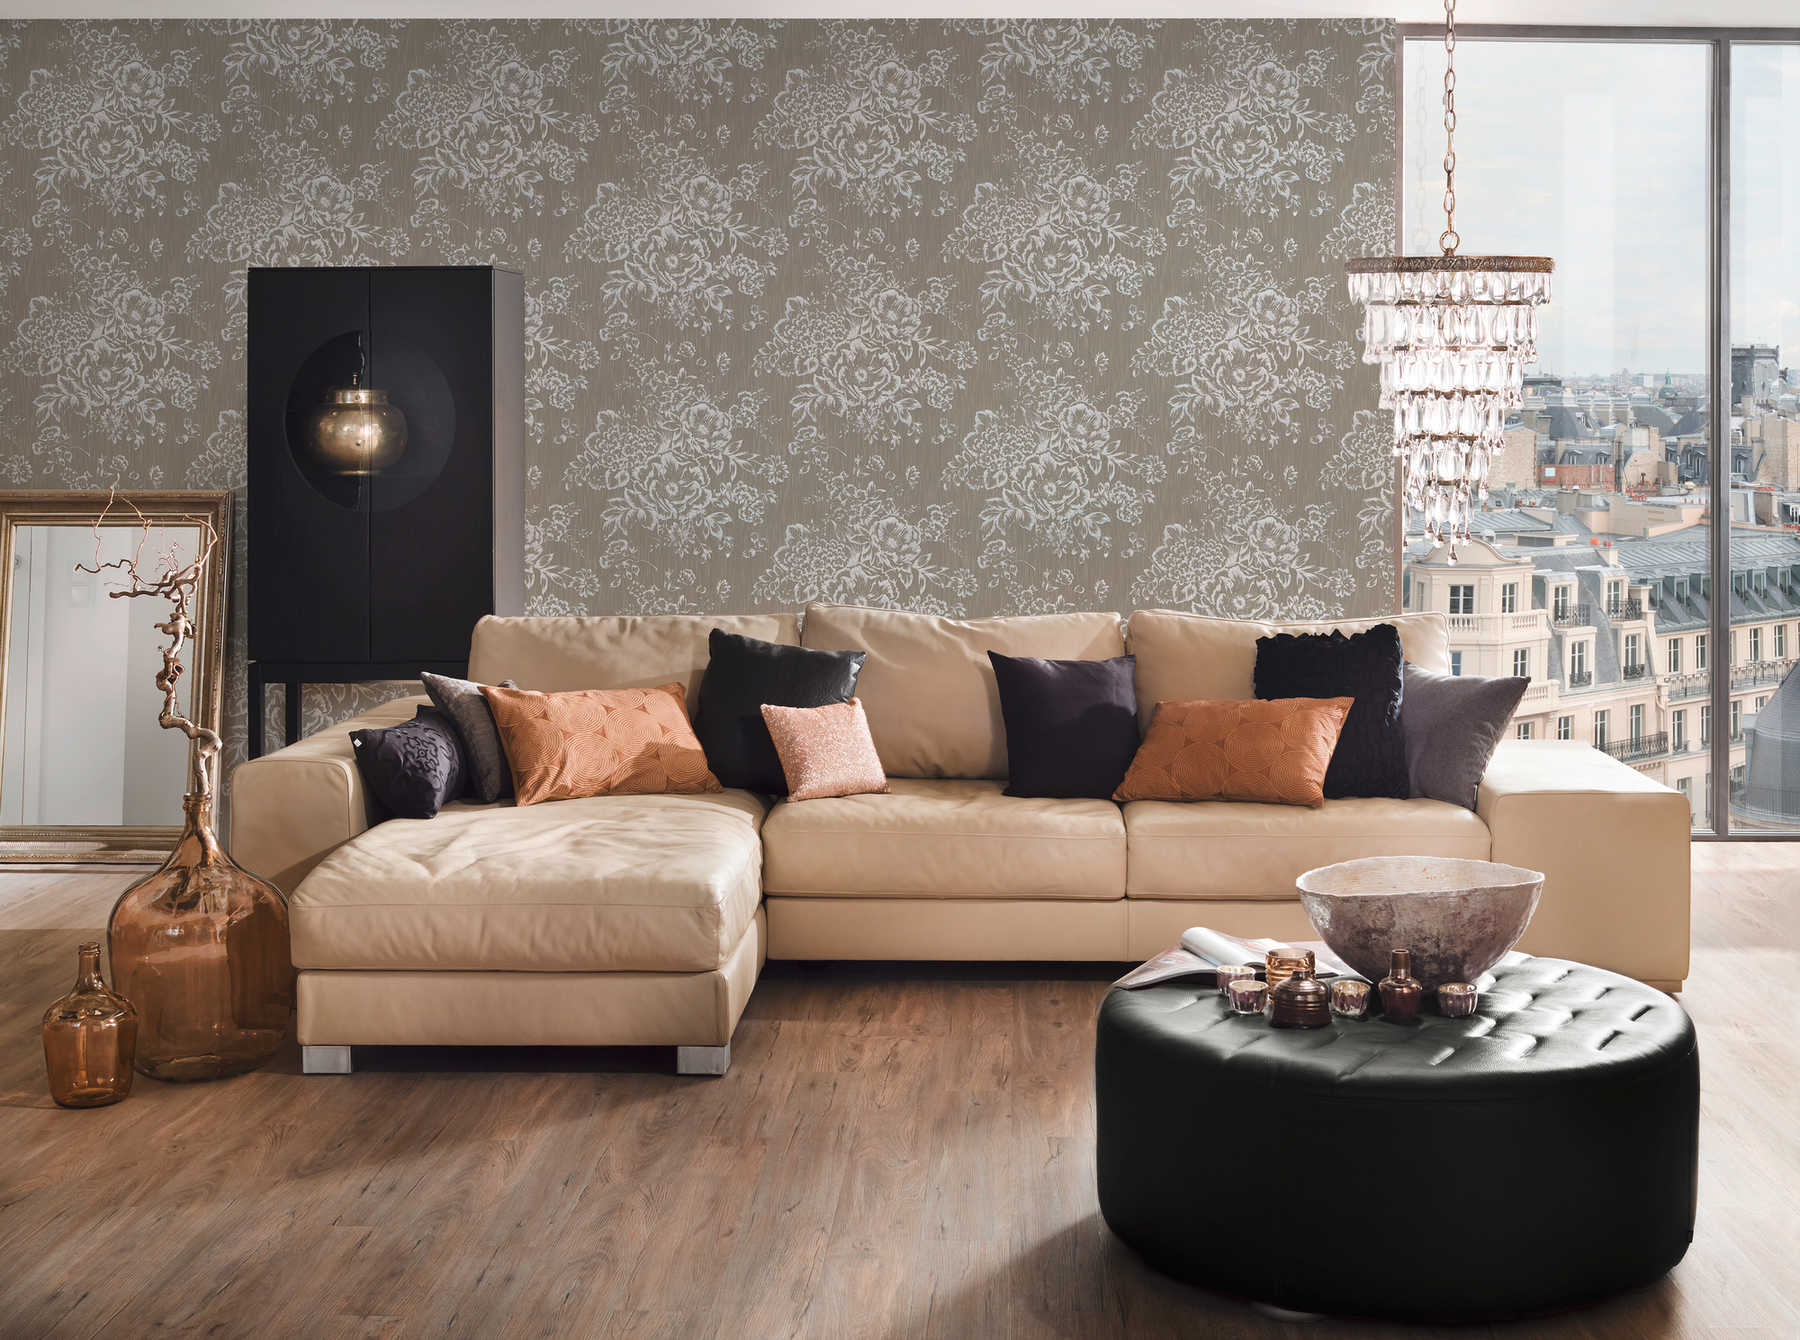             Textured wallpaper with silver floral pattern - silver, brown
        